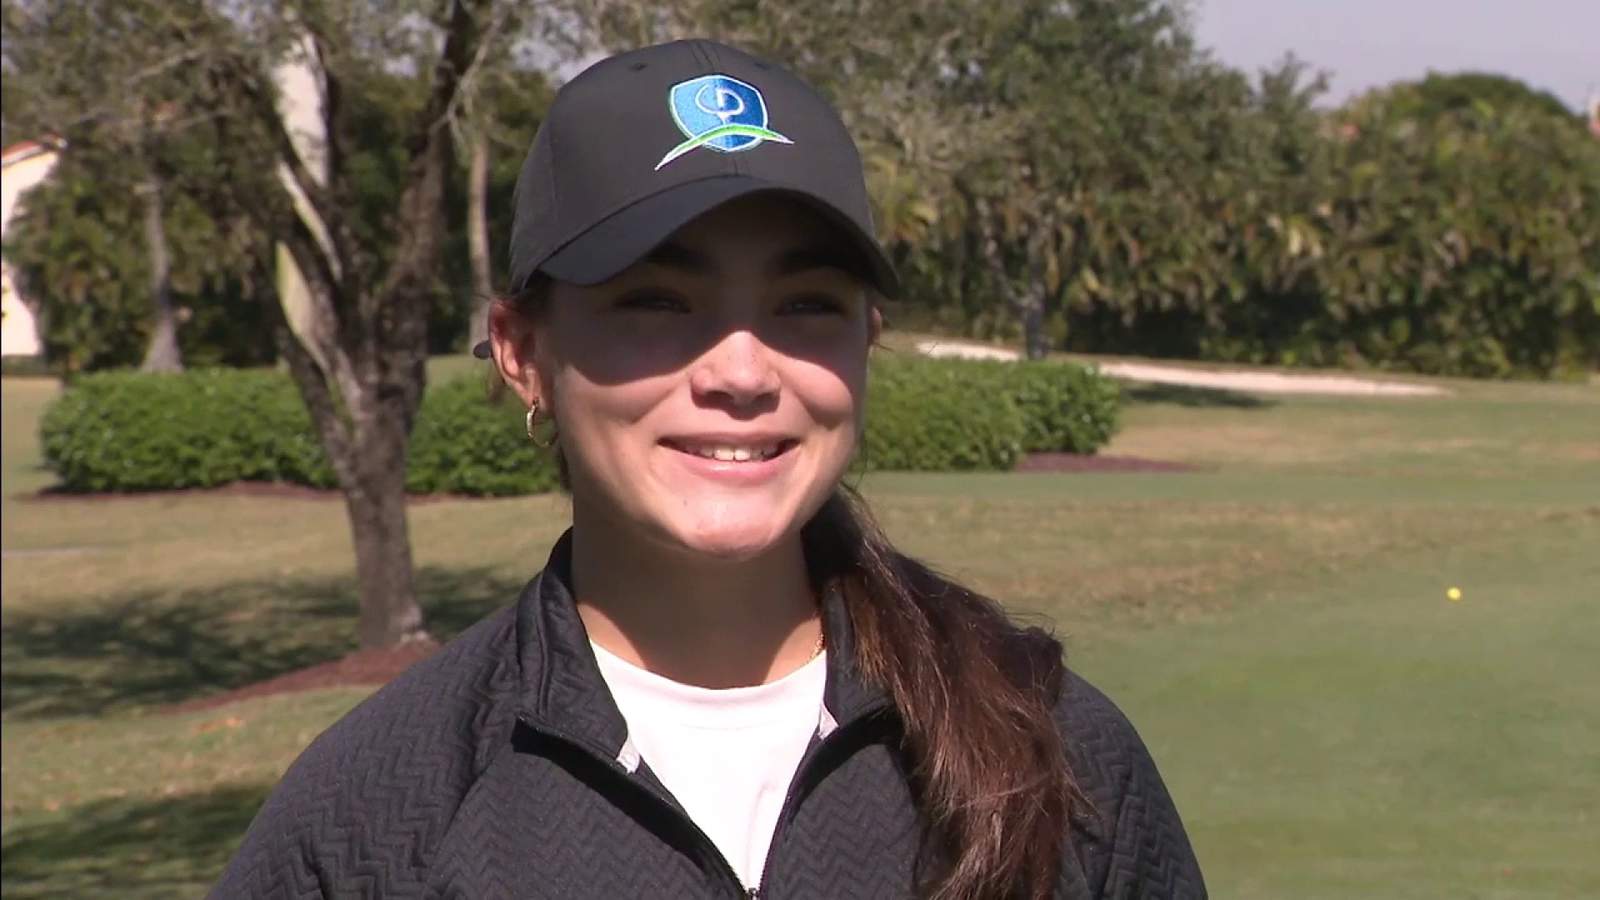 Southwest Ranches teen golf phenom gets opportunity to tee it up with LGPA Tour pros